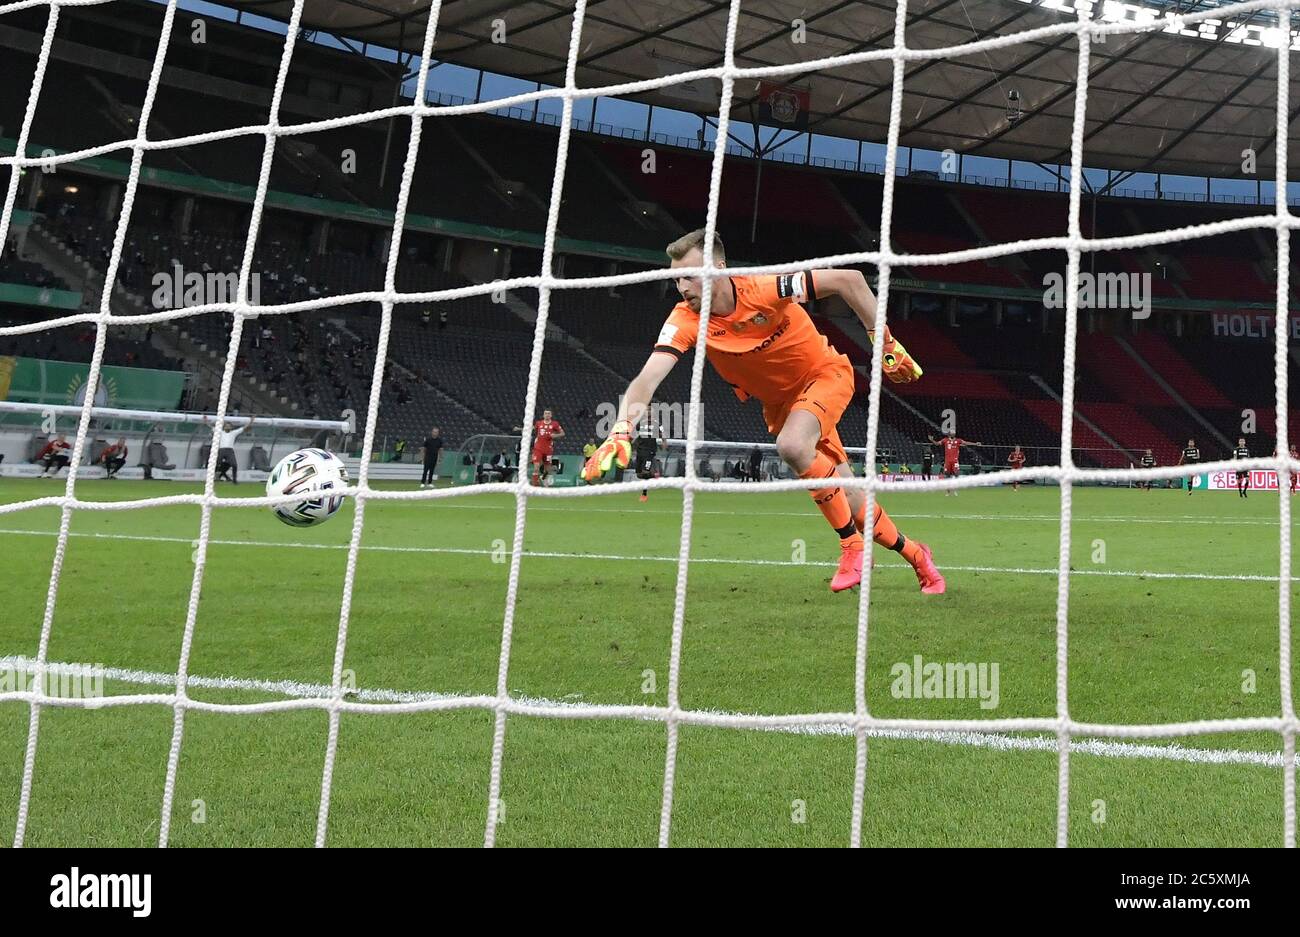 Berlin, Germany, 4 th July 2020,  Lukas HRADECKY, Lev 1 fault, mistake for 0-3 goal of Robert LEWANDOWSKI, FCB 9  at the DFB Pokal Final match  FC BAYERN MUENCHEN - BAYER 04 LEVERKUSEN 4-2  in season 2019/2020 , FCB Foto: © Peter Schatz / Alamy Live News / Kevin Voigt/Jan Huebner/Pool   - DFB REGULATIONS PROHIBIT ANY USE OF PHOTOGRAPHS as IMAGE SEQUENCES and/or QUASI-VIDEO -  National and international News-Agencies OUT Editorial Use ONLY Stock Photo